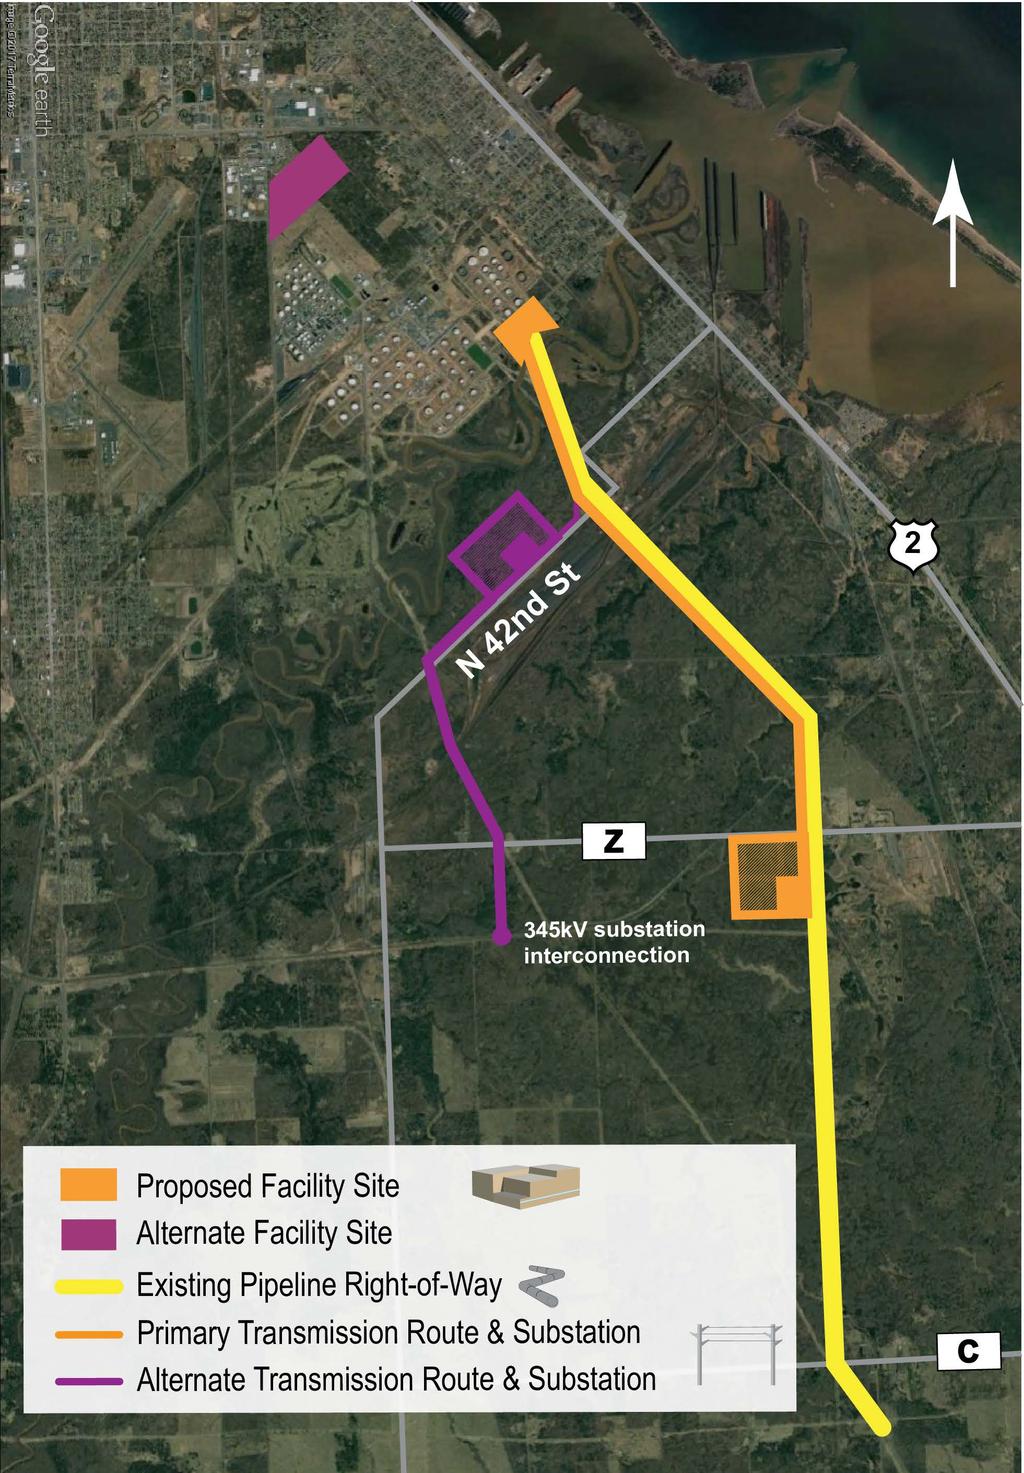 seven-mile natural gas pipeline using existing right-of-way